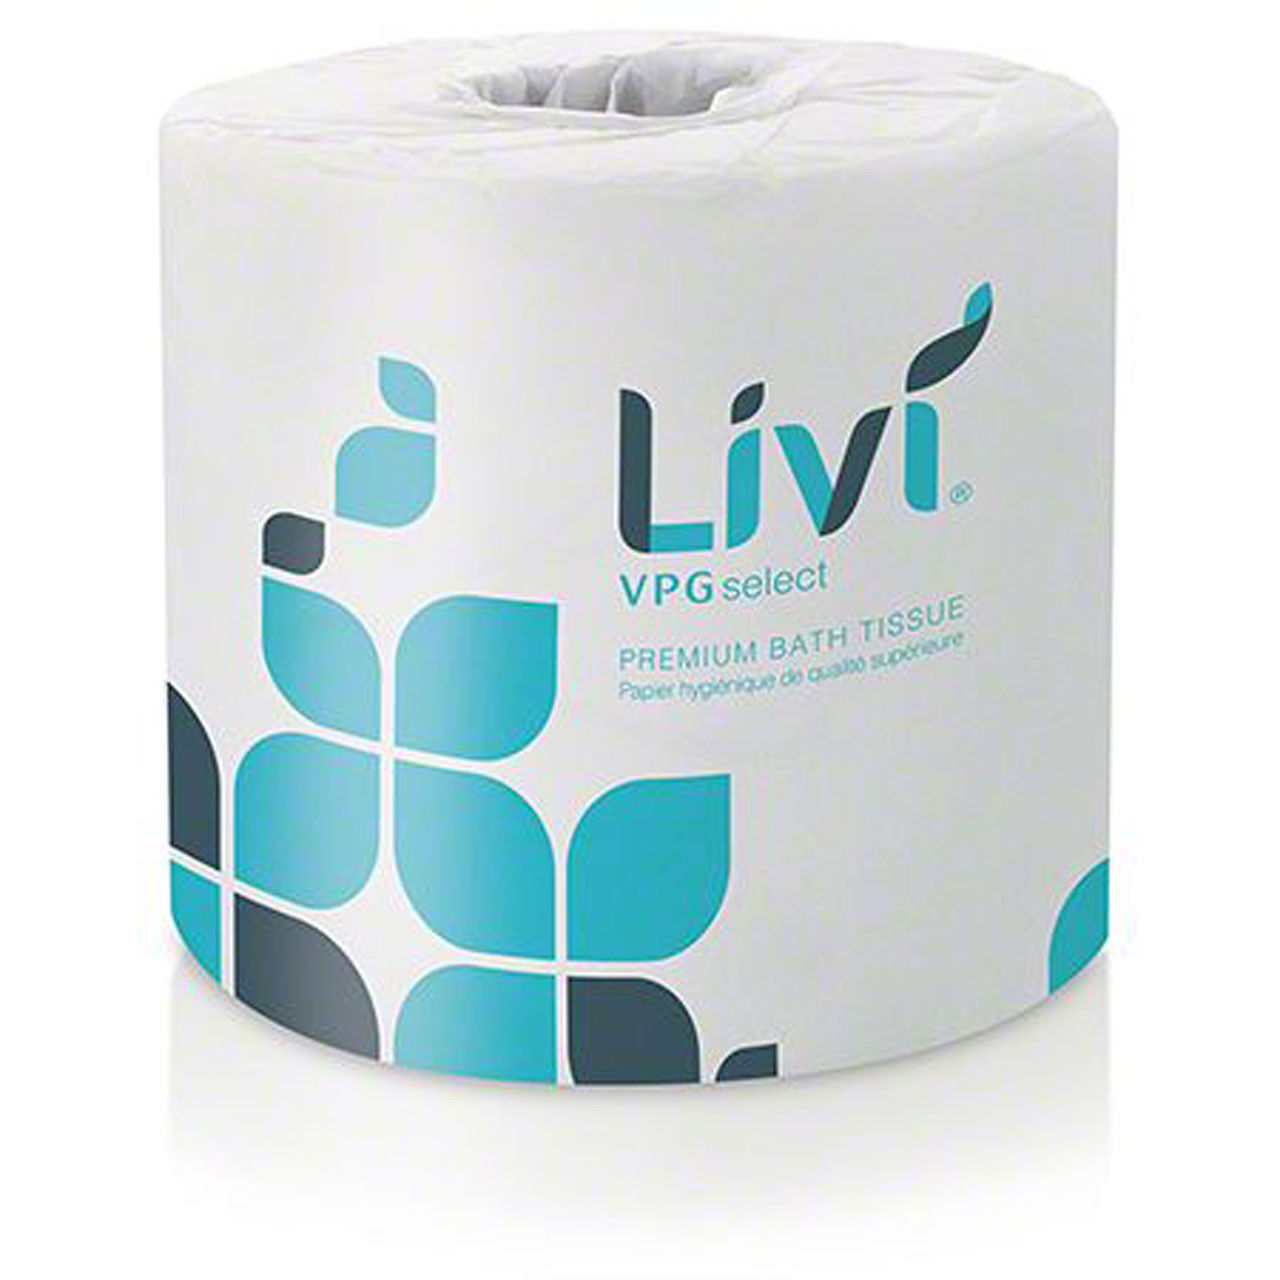 How many sheets does each roll of Solaris Paper Livi VPG Select Toilet Tissue 2/ply contain?